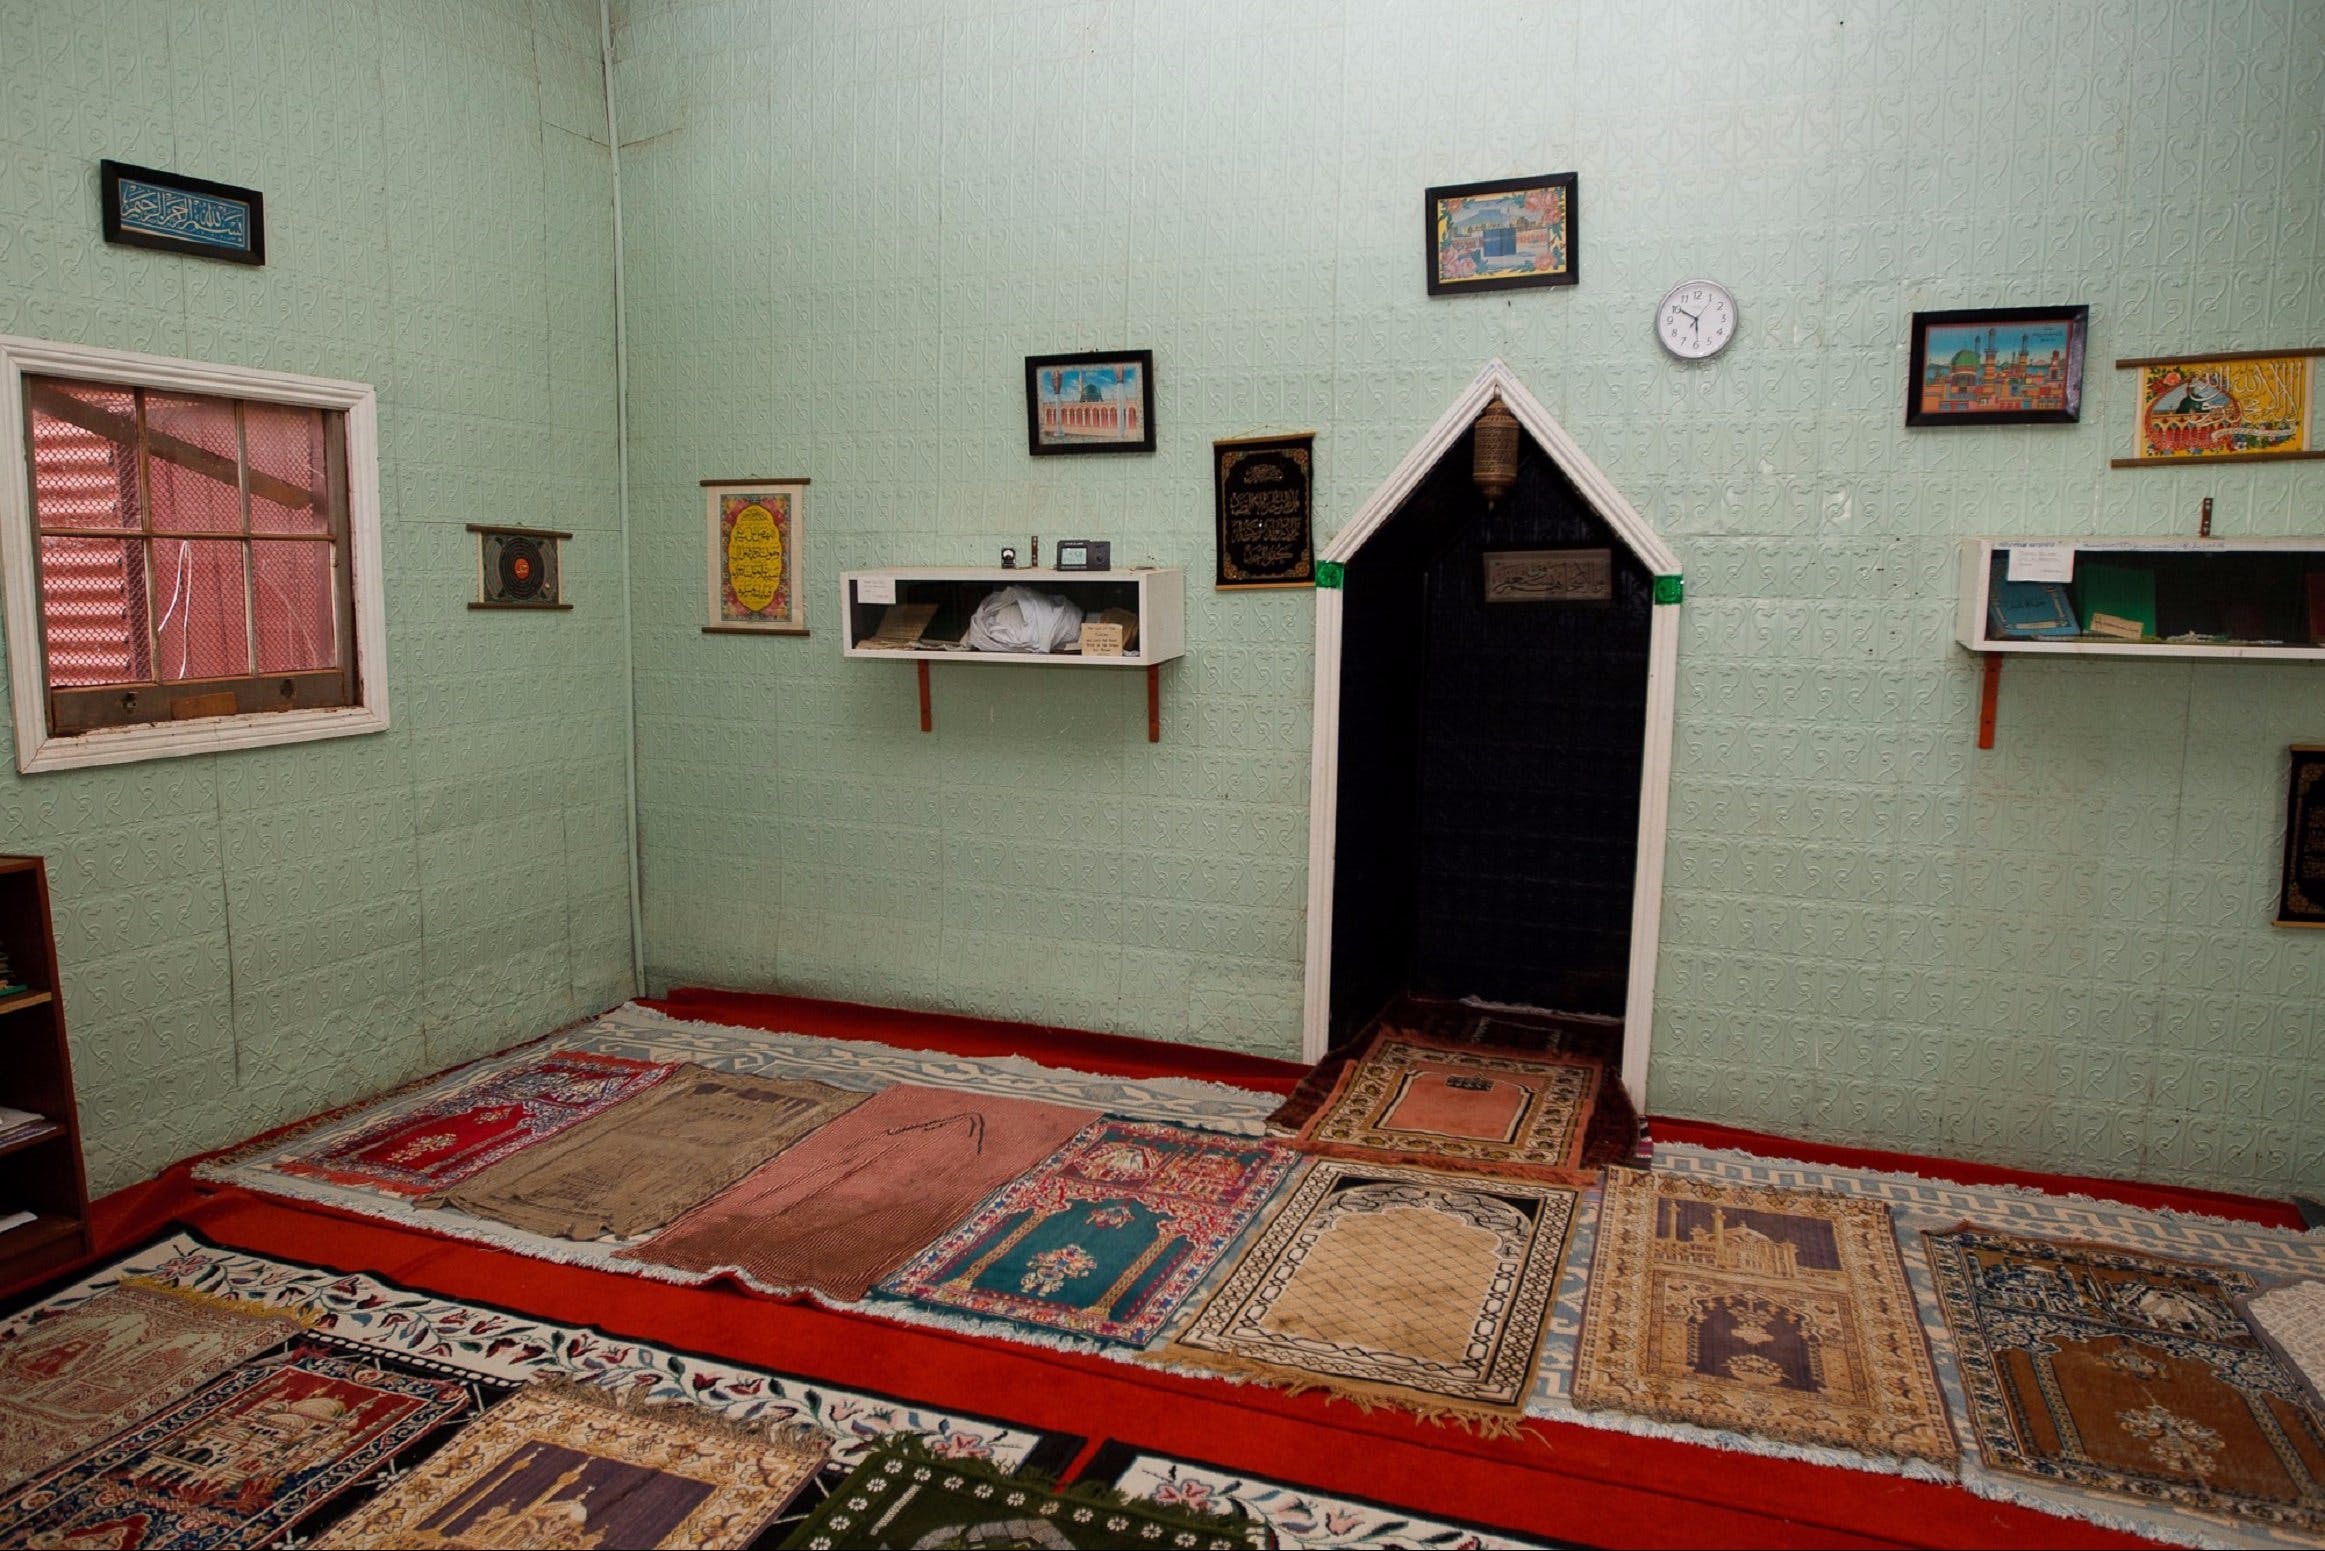 Afghan Mosque - Accommodation Nelson Bay